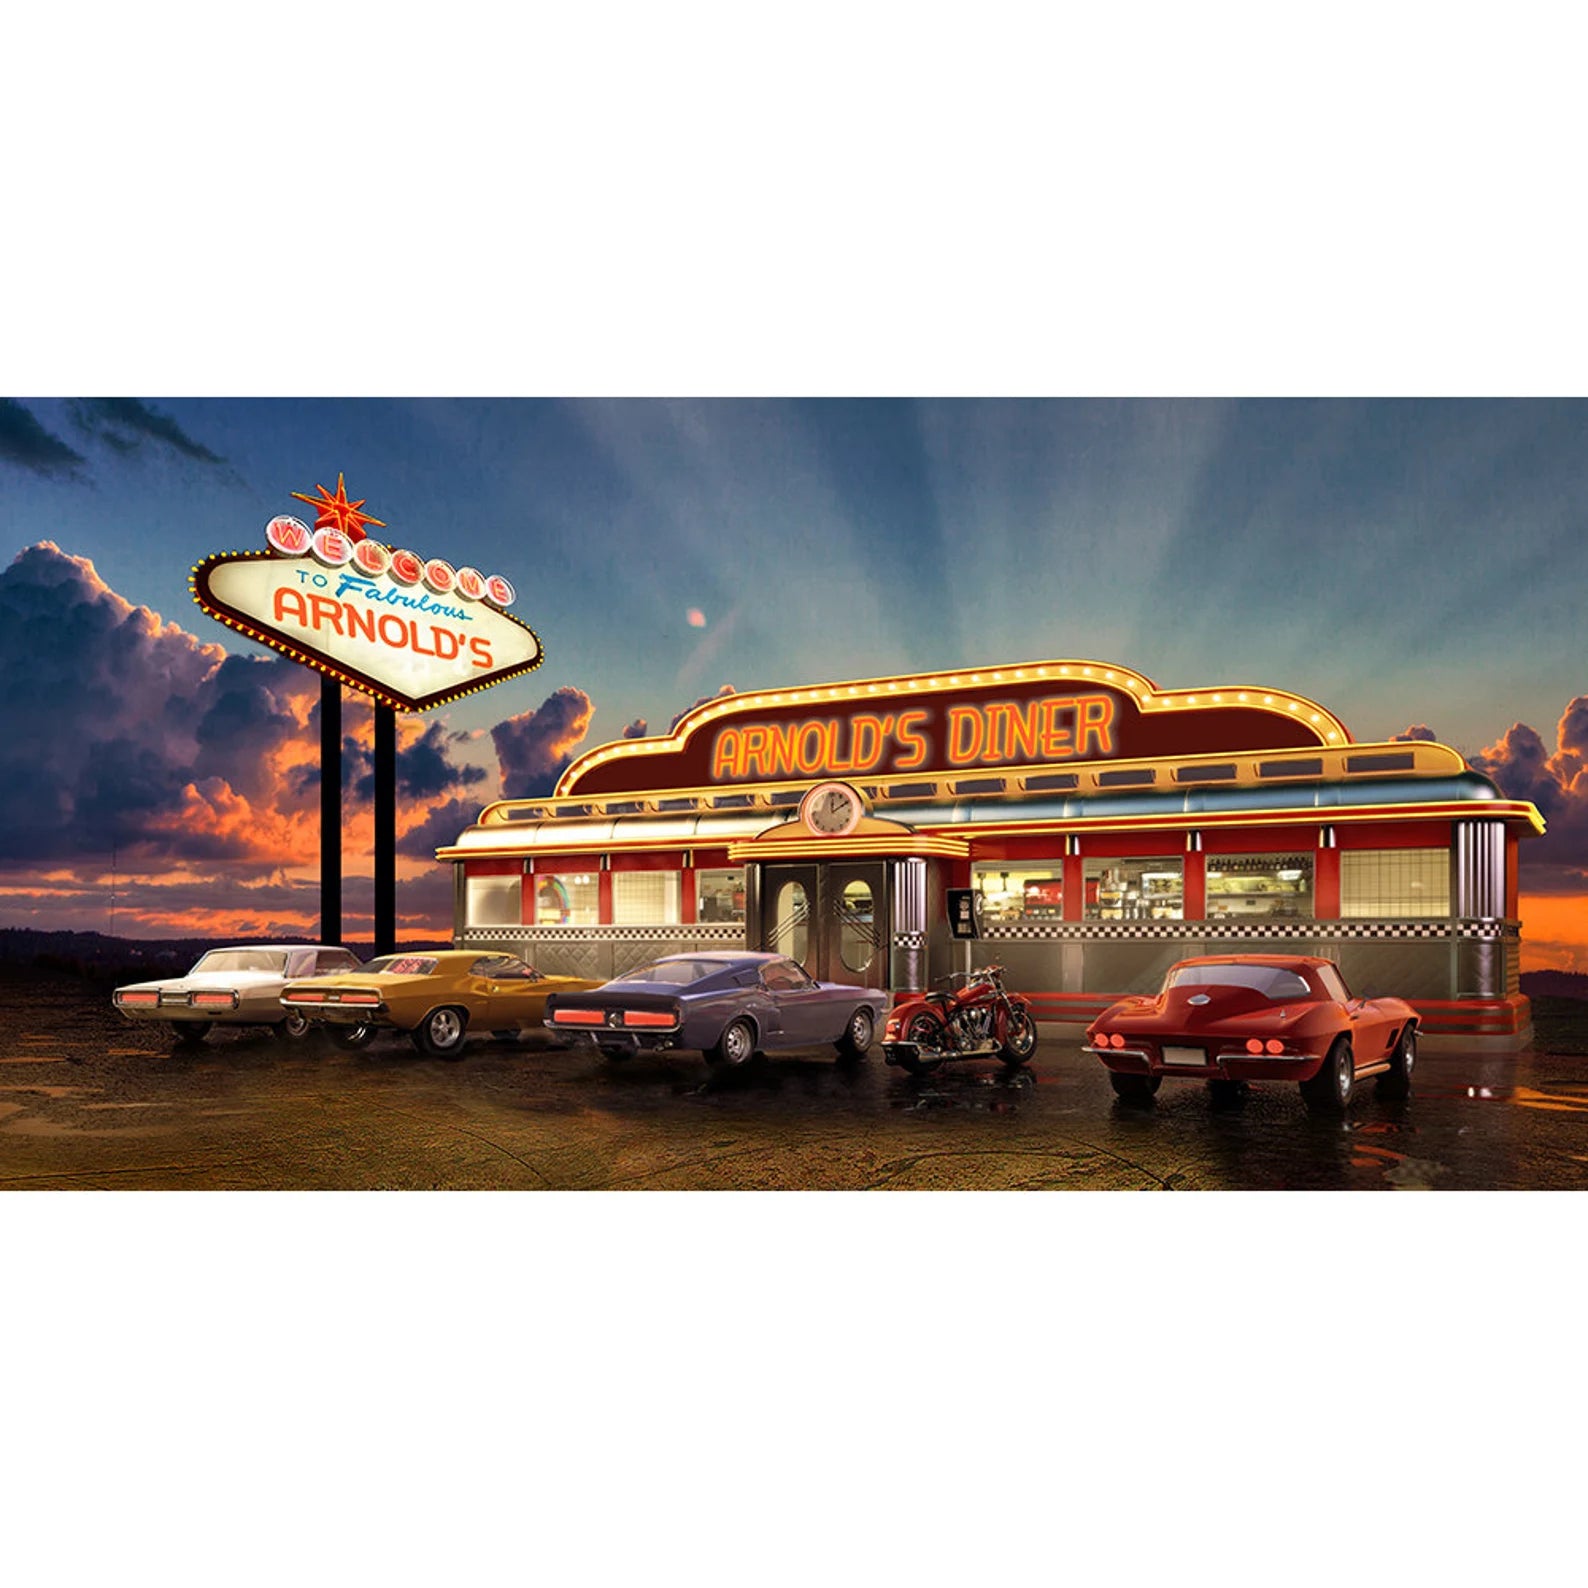 Red 57 Chevy Diner Photo Backdrop - Pro 16  x 9  